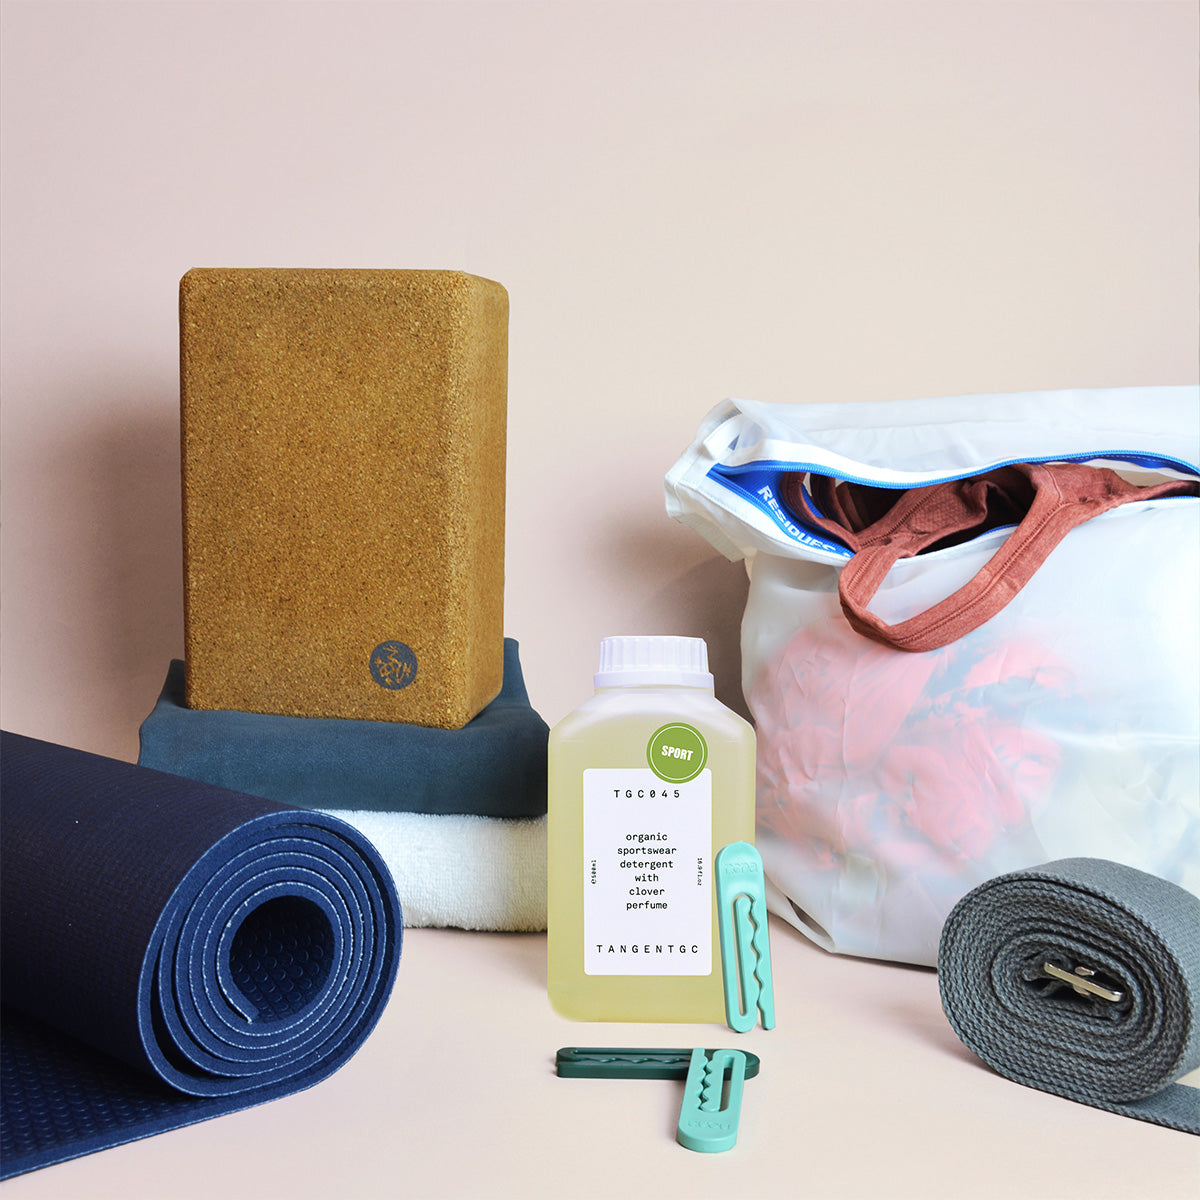 An assortment of yoga equipment and eco-friendly laundry products